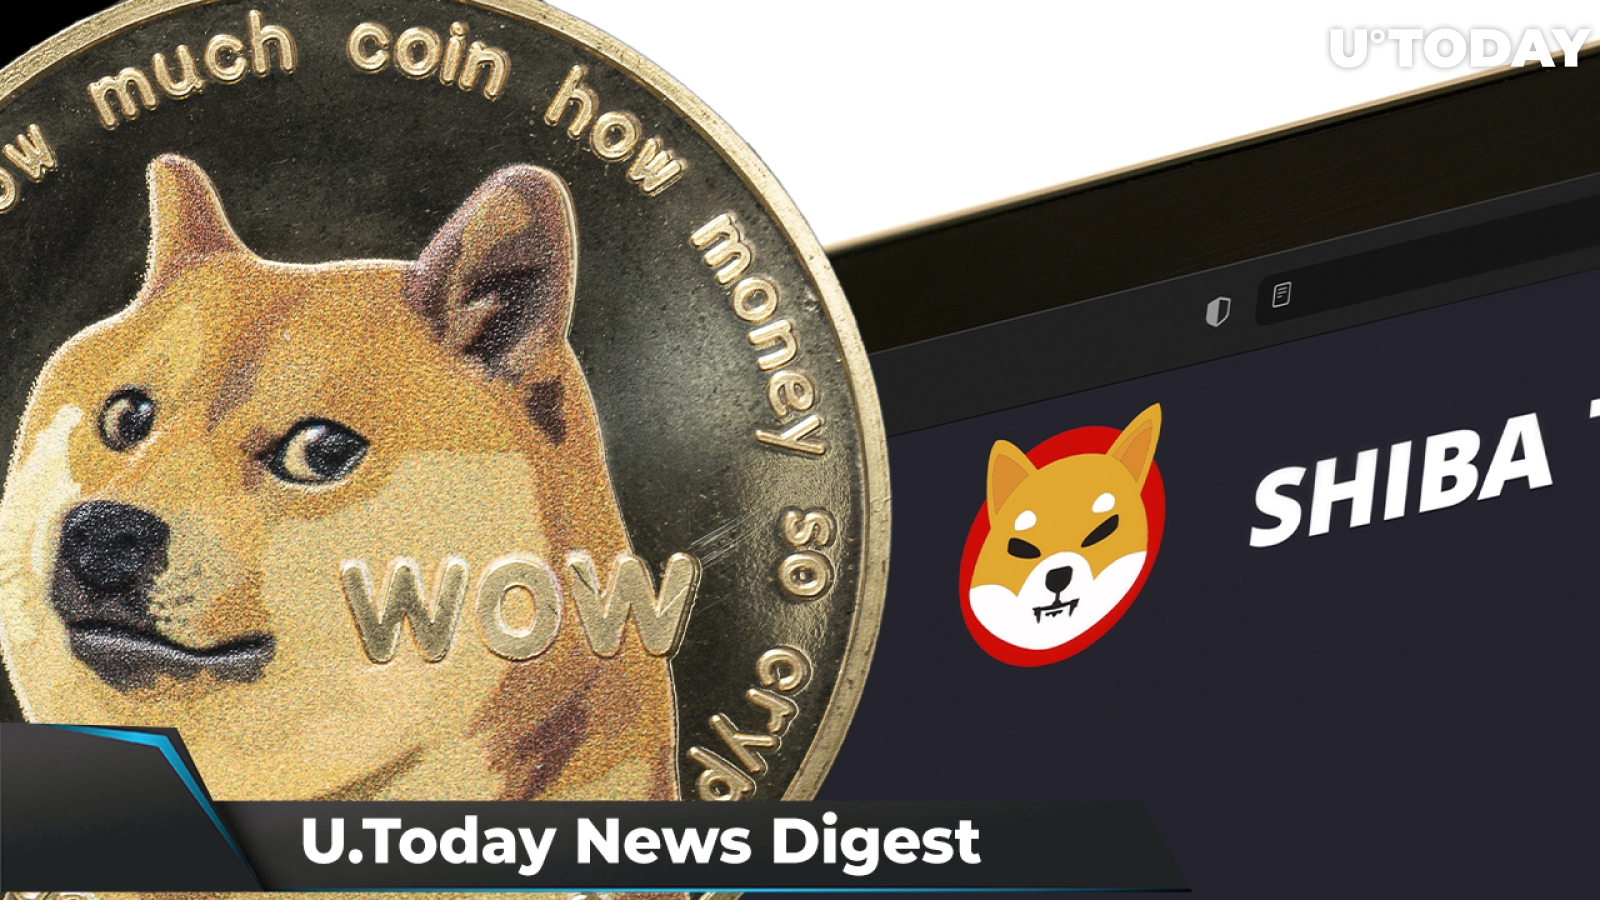 Top Whale Buys 223 Billion SHIB, DOGE Creator Predicts $1 DOGE, ETH Shadow Forks Timeline Updated: Crypto News Digest by U.Today